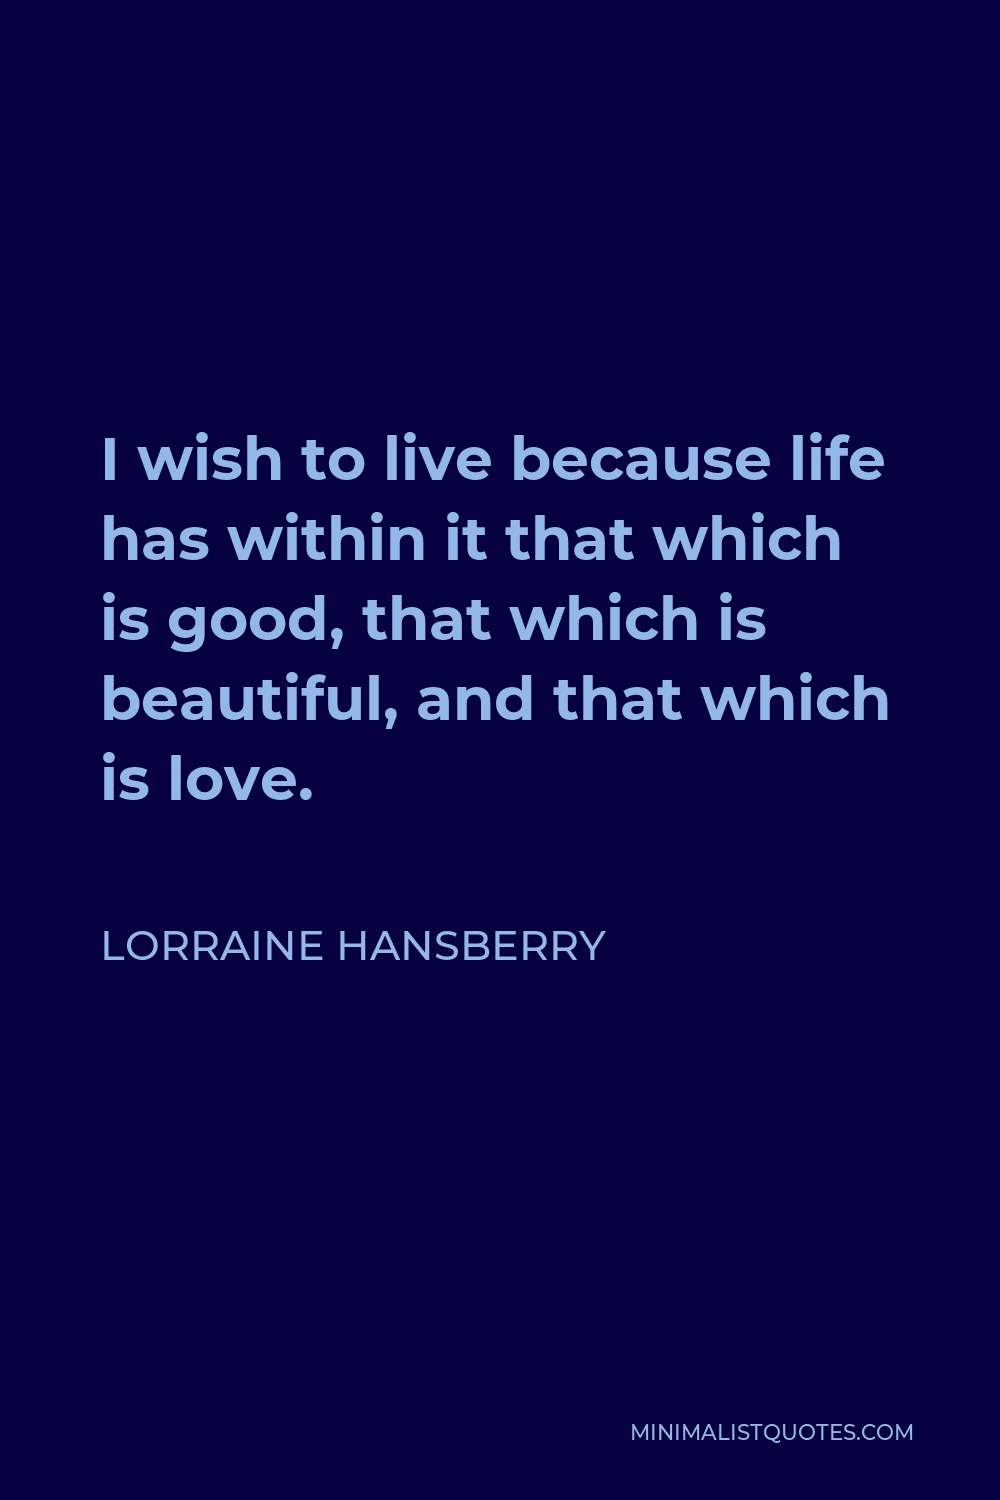 Lorraine Hansberry Quote - I wish to live because life has within it that which is good, that which is beautiful, and that which is love.